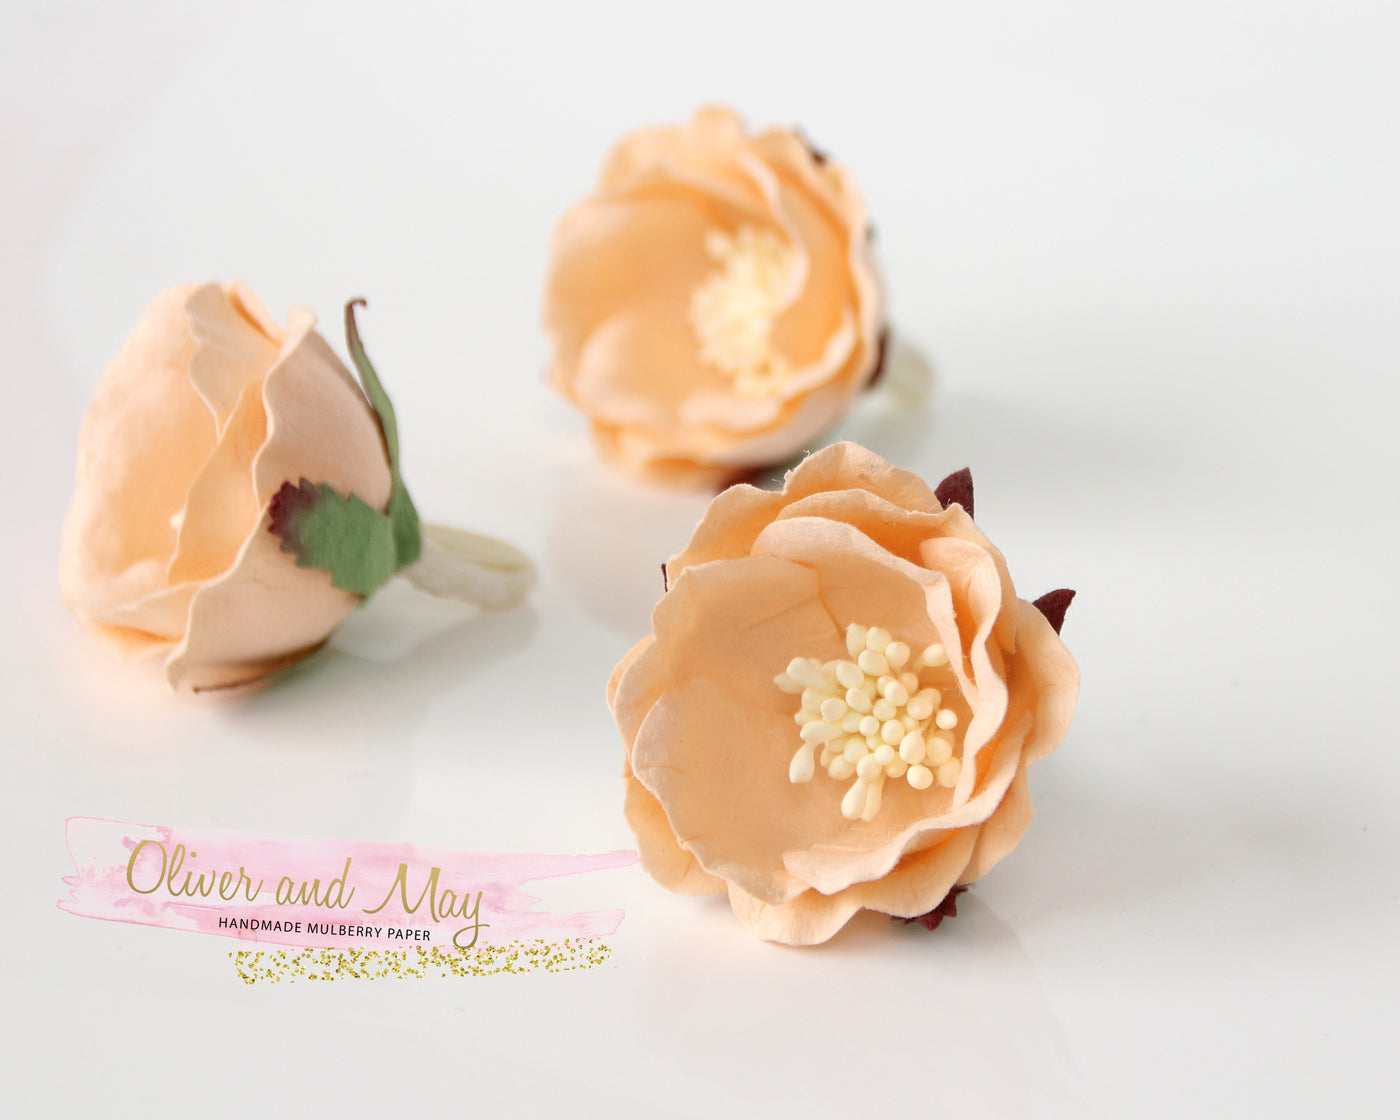 5 pcs Mulberry Paper Flowers - Polyantha Roses - 4.5cm in Soft Peach